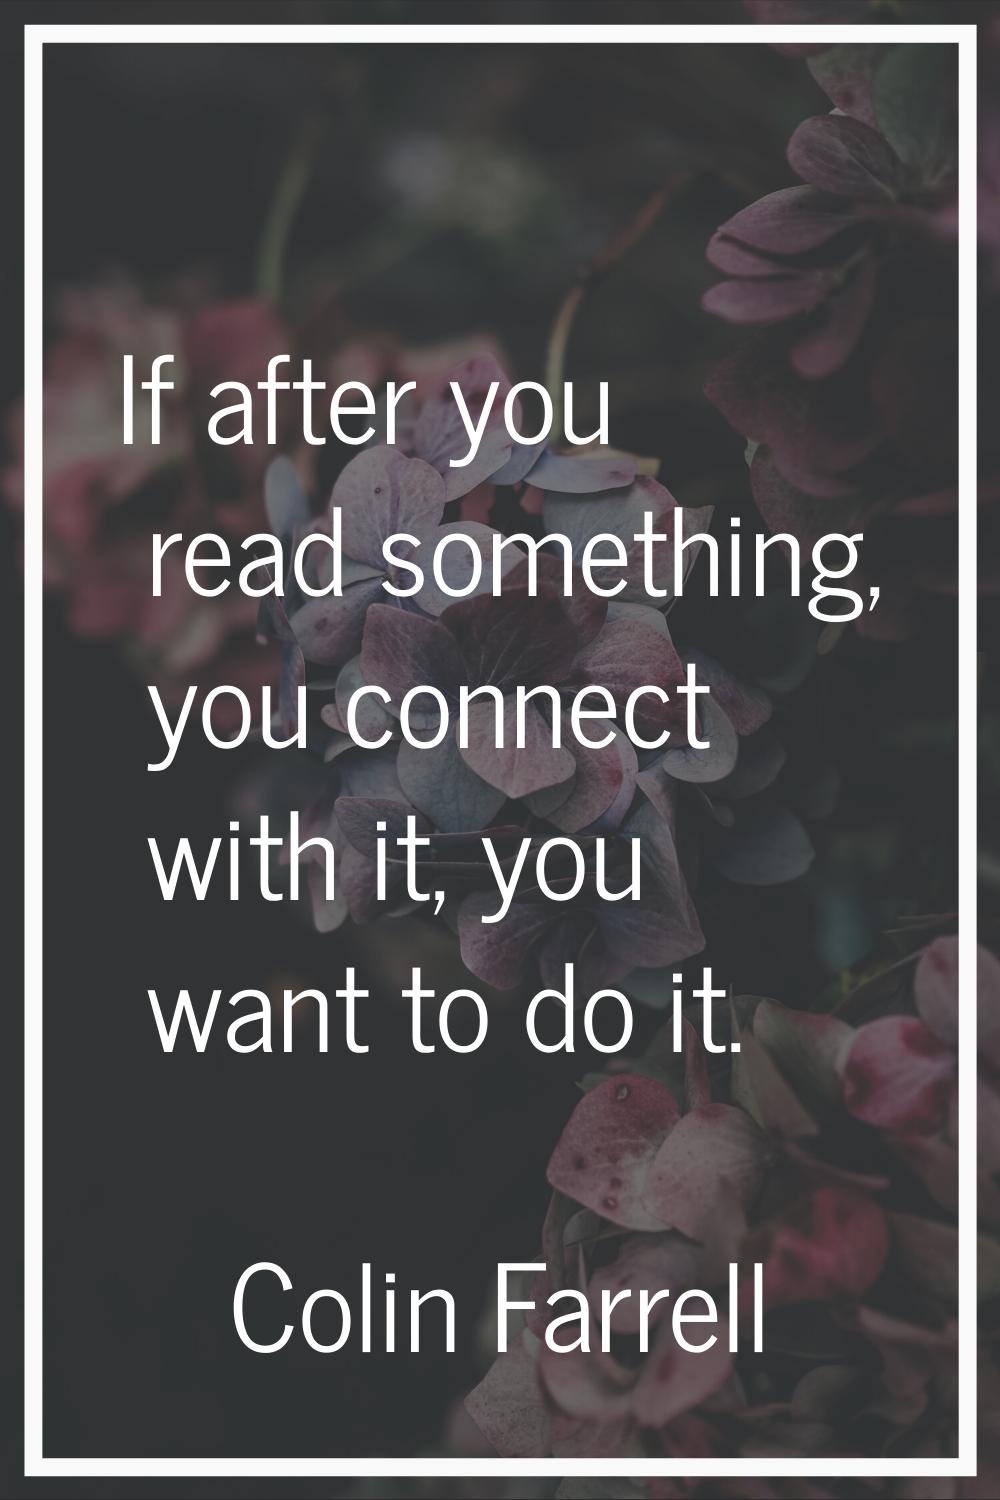 If after you read something, you connect with it, you want to do it.